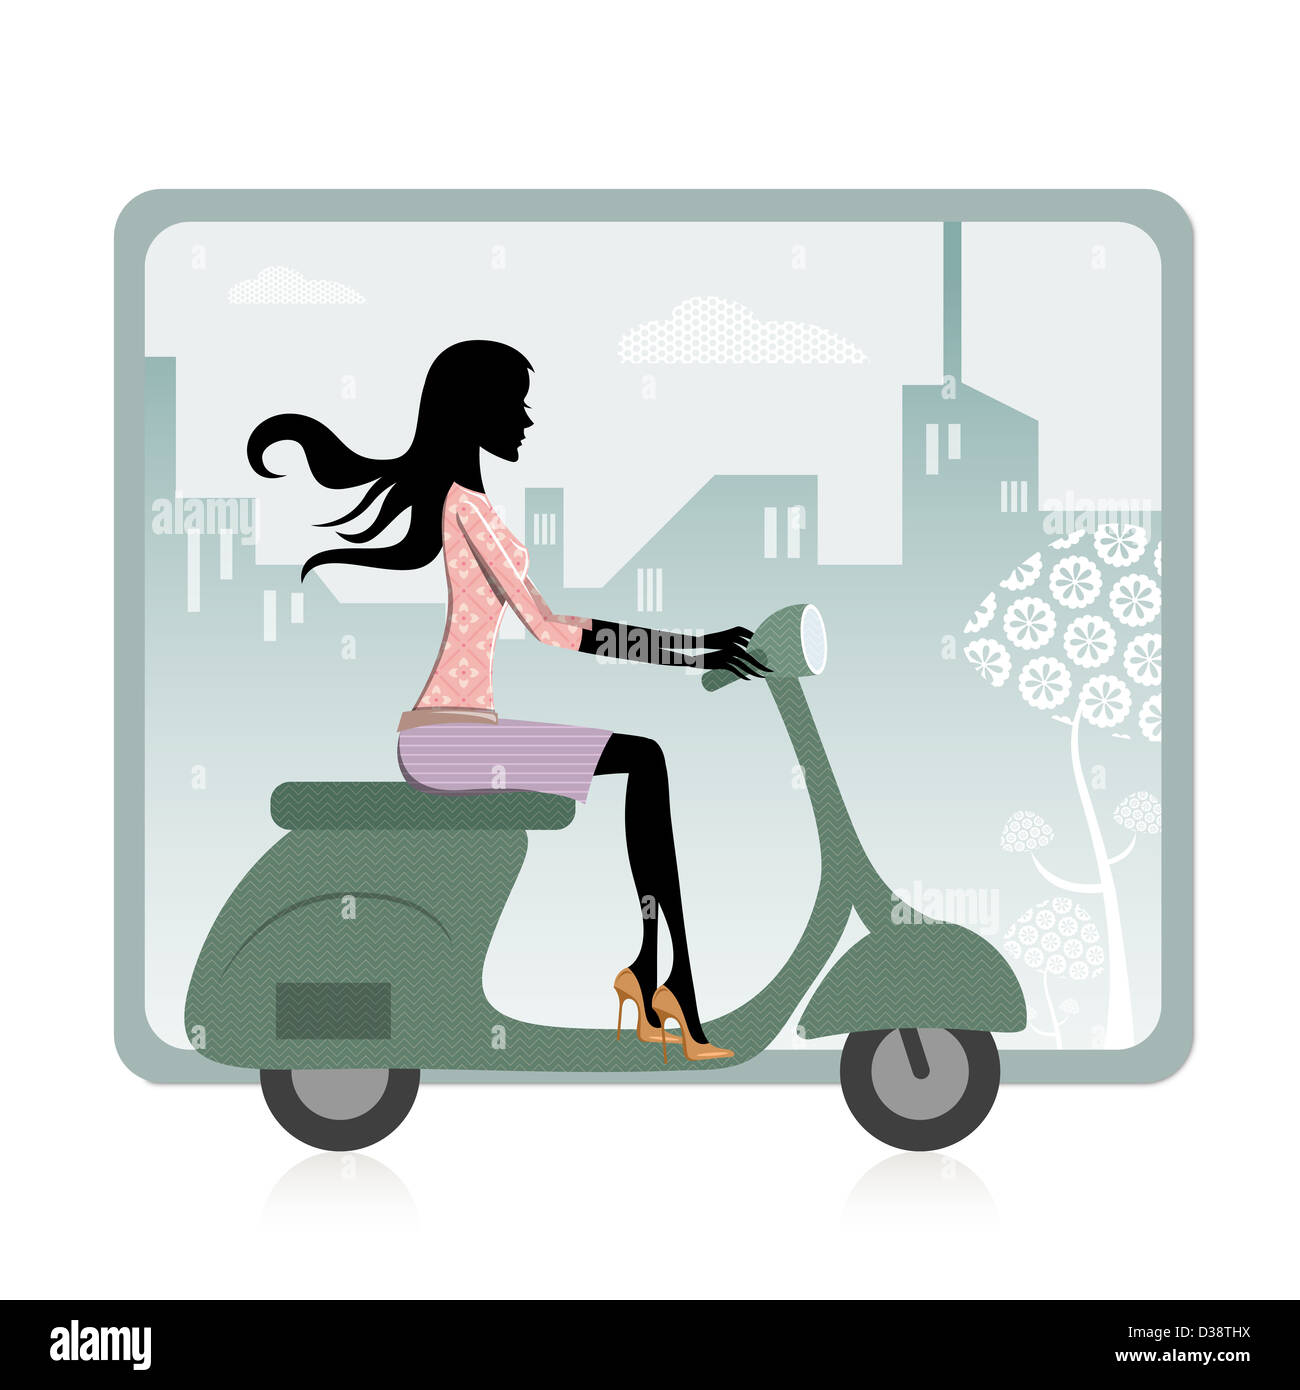 Woman riding a scooter Banque D'Images